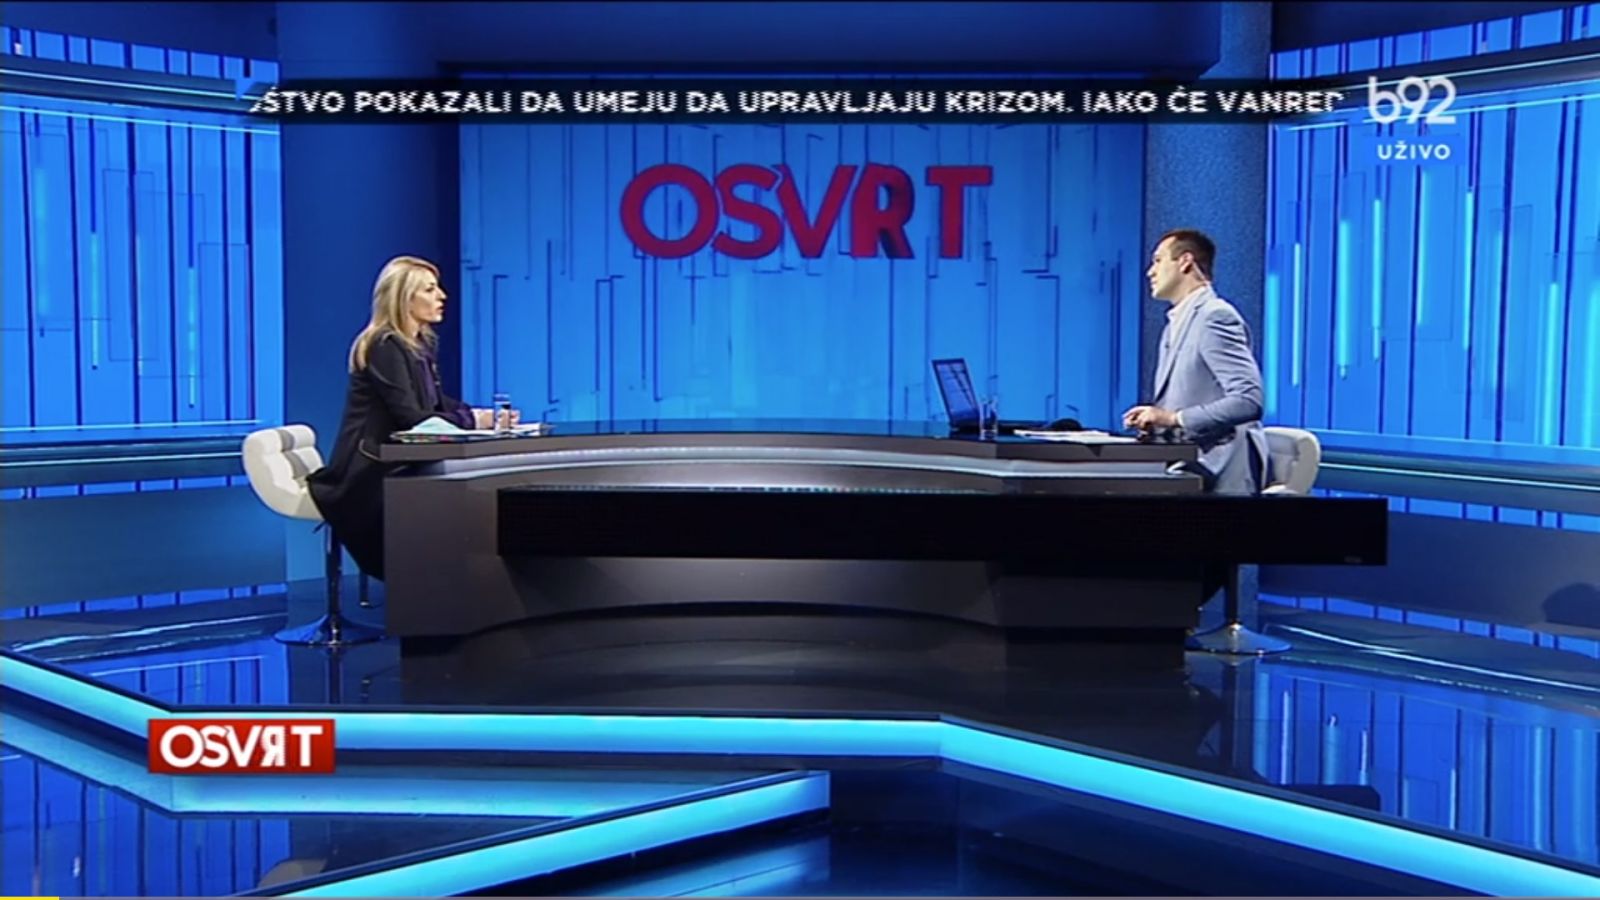 J. Joksimović: Important that the Summit has not been cancelled in these circumstances